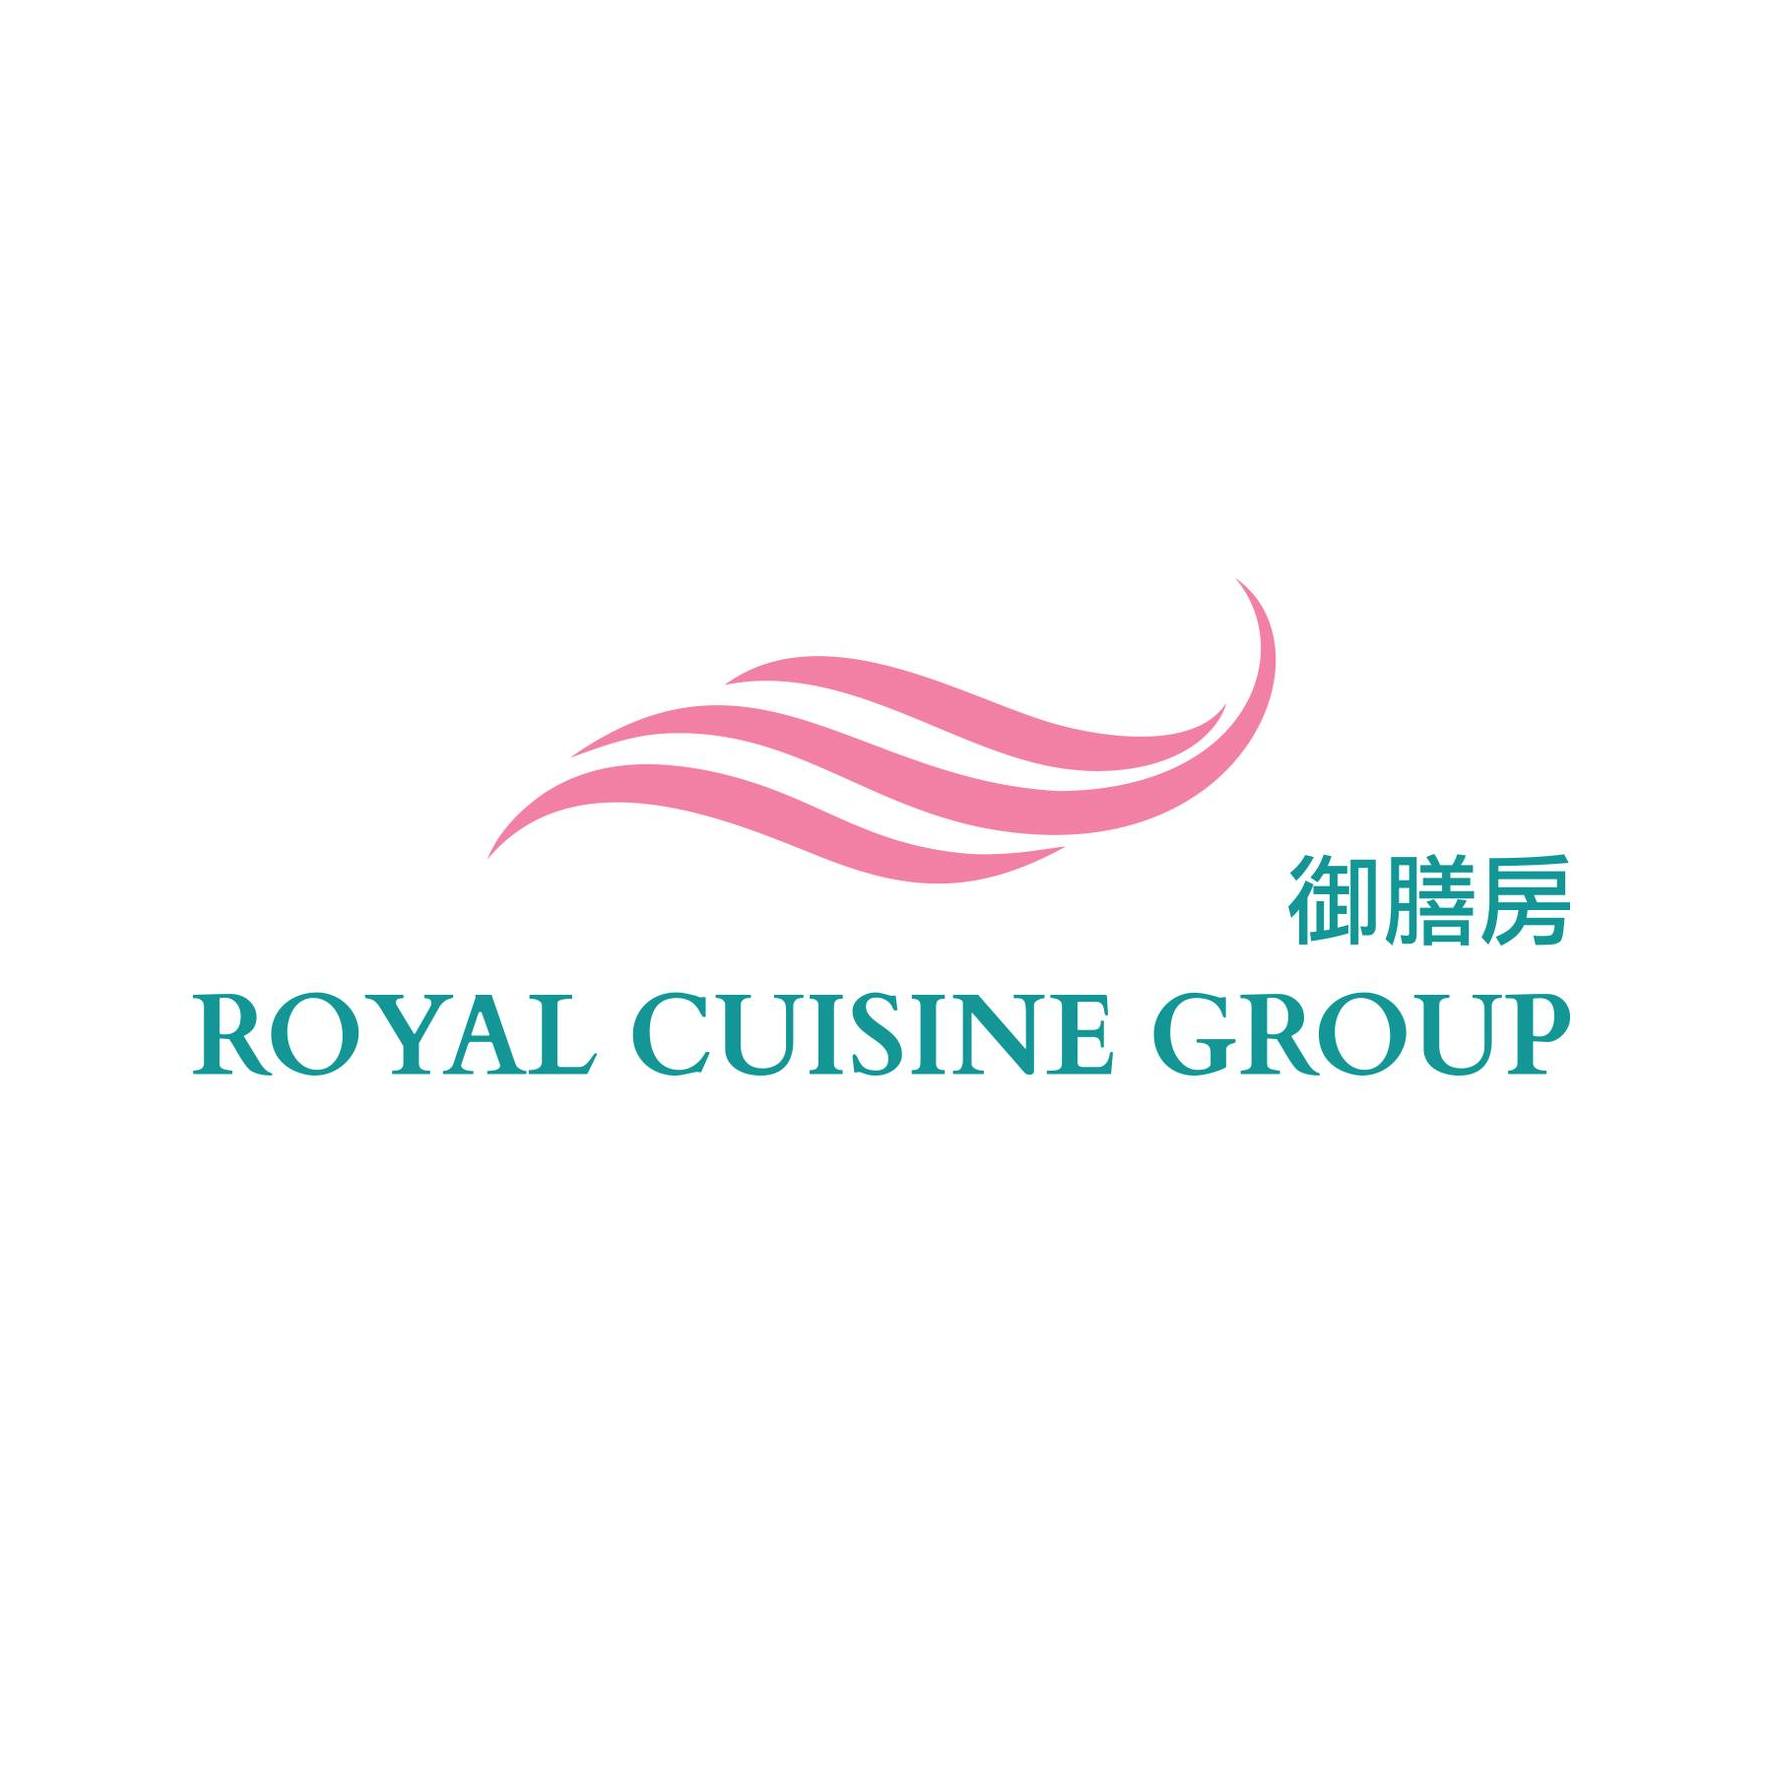 Royal Cuisine Group-Dinner Meals Delivery Singapore